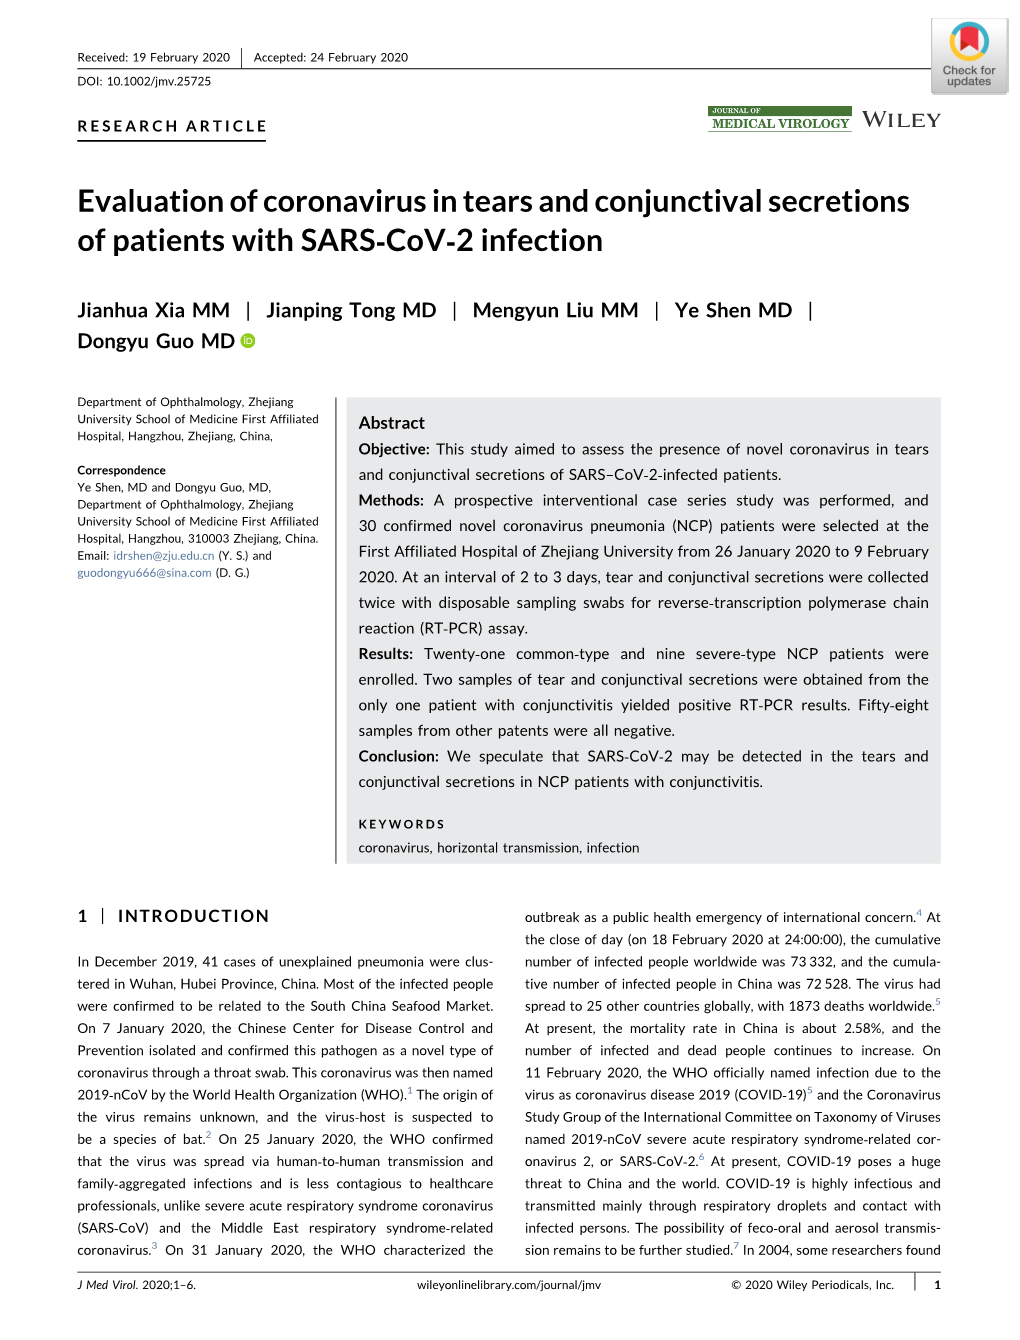 Evaluation of Coronavirus in Tears and Conjunctival Secretions of Patients with SARS‐Cov‐2 Infection